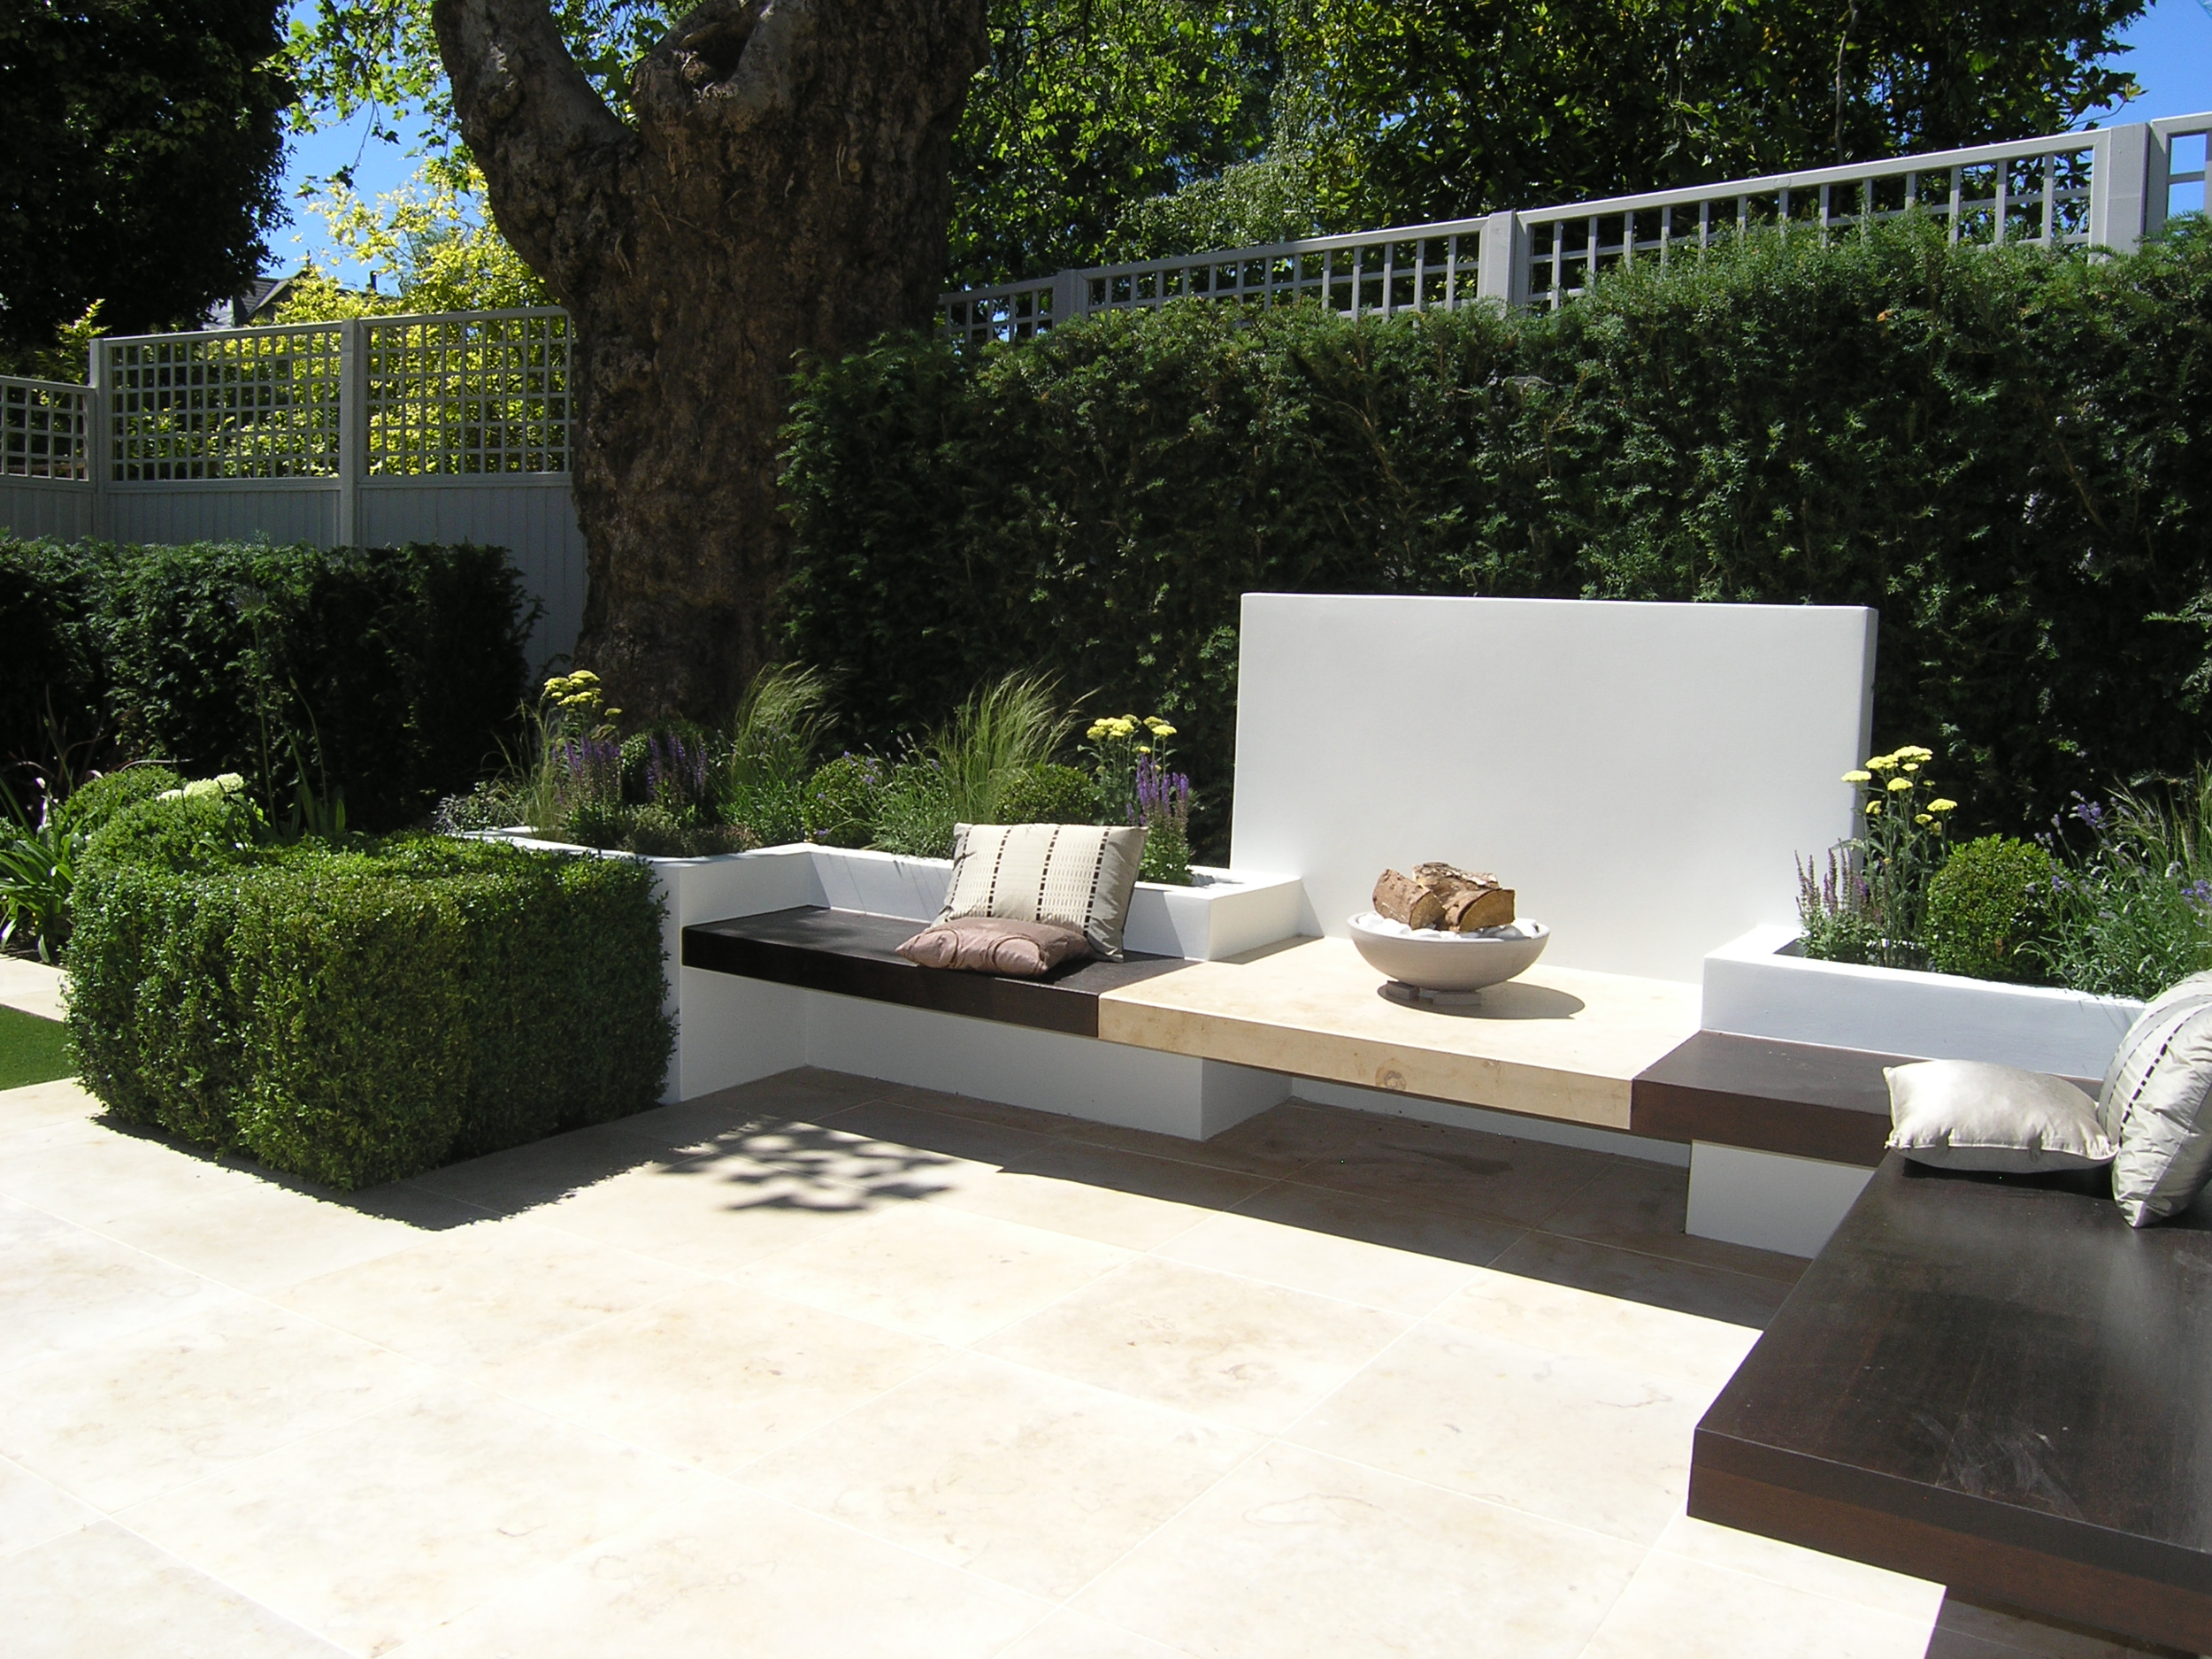 Hardwood benches and limestone patio in low maintenance garden design N6